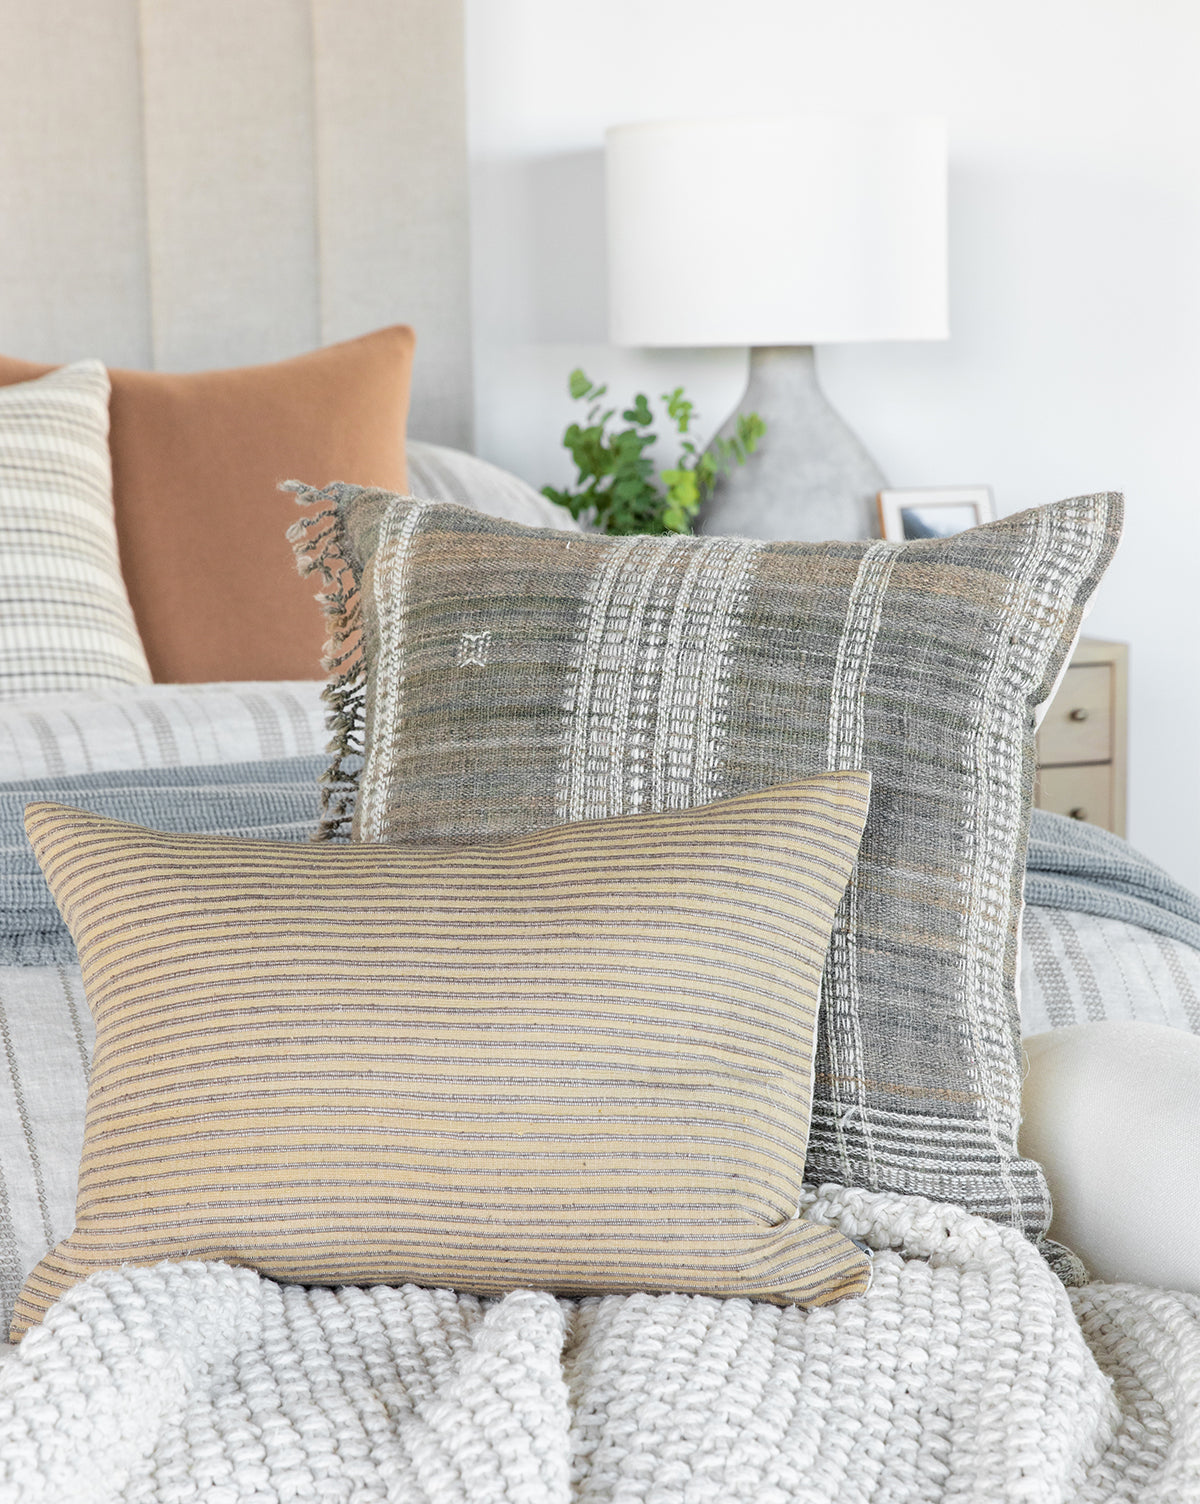 Filling Spaces, Rocco Pillow Cover